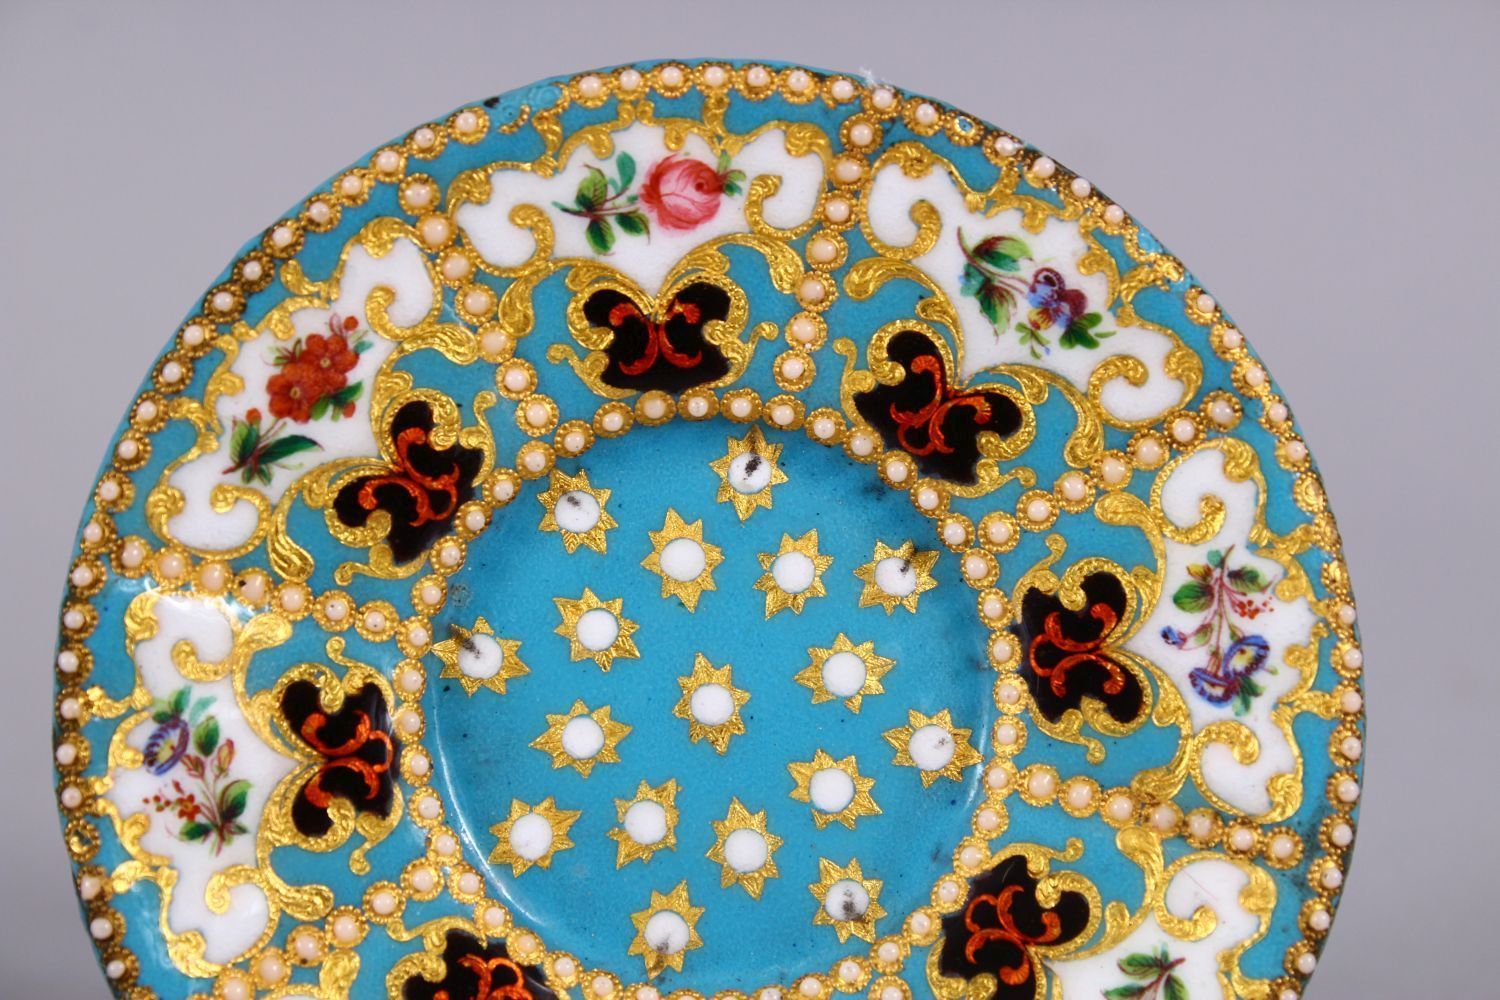 A FINE 19TH CENTURY OTTOMAN OR OTTOMAN MARKET ENAMELLED CUP AND SAUCER, with finely painted panels - Image 5 of 8